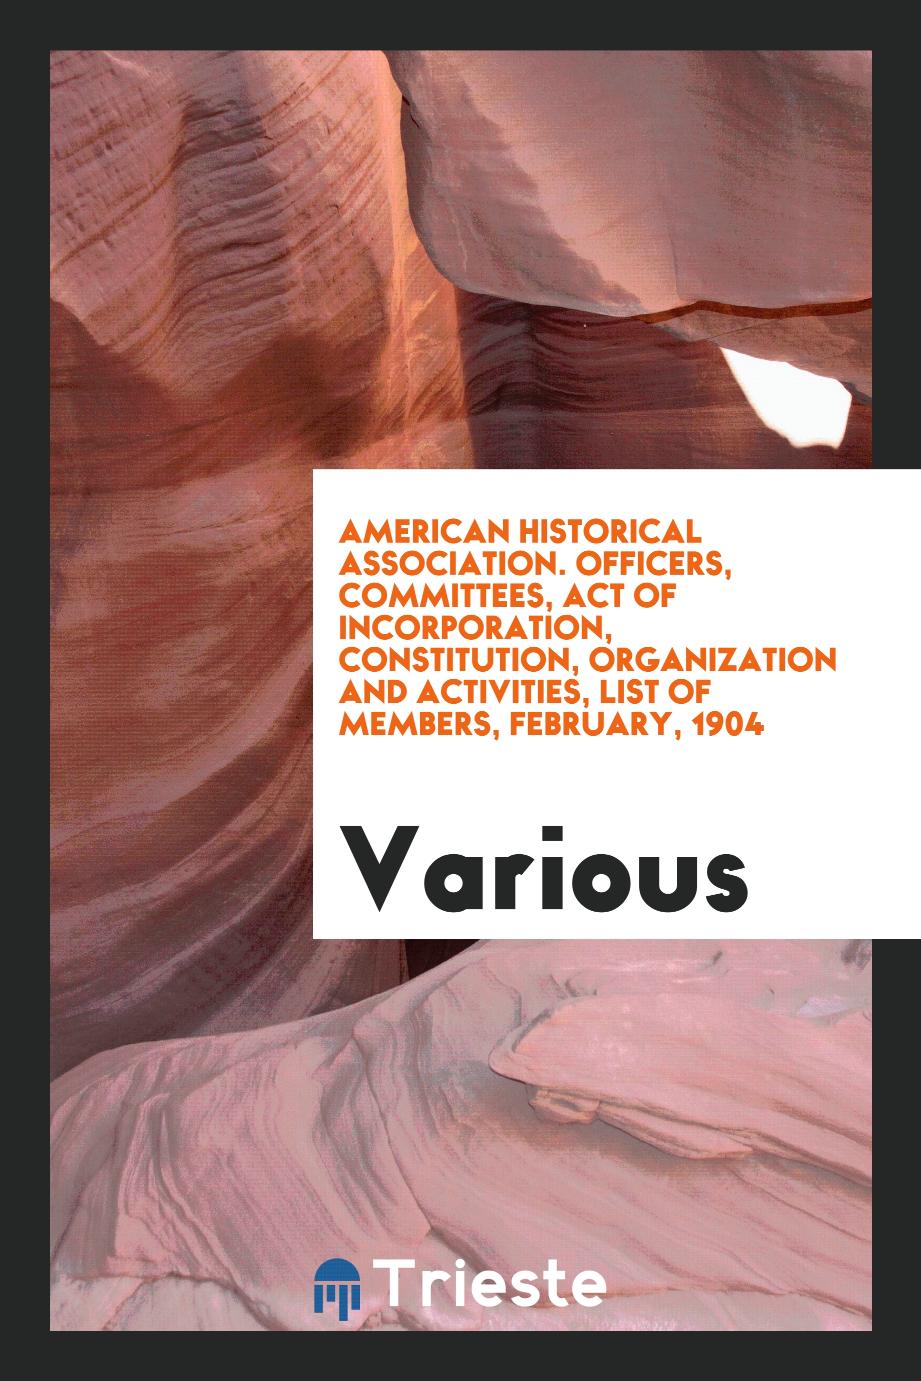 American Historical Association. Officers, Committees, Act of Incorporation, Constitution, Organization and Activities, List of members, February, 1904